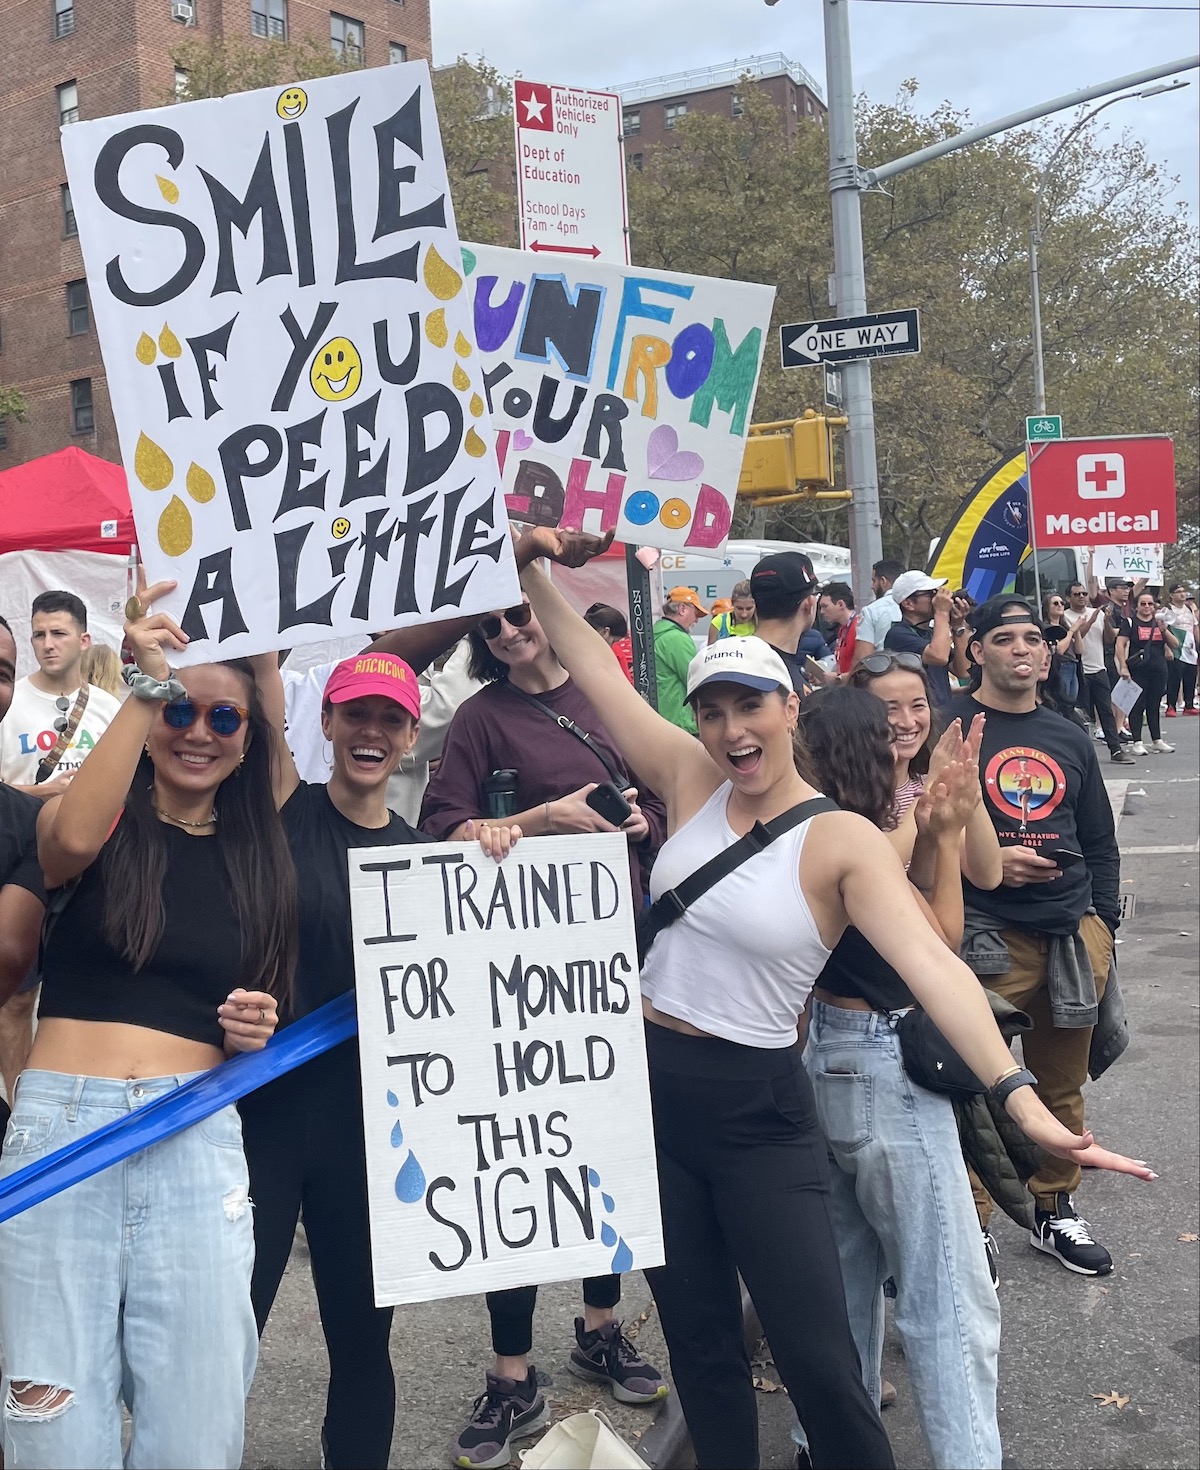 Spectators along the New York City Marathon route hold signs reading "Smile if you peed a little," "Run from your childhood" and "I trained for months to hold this sign."